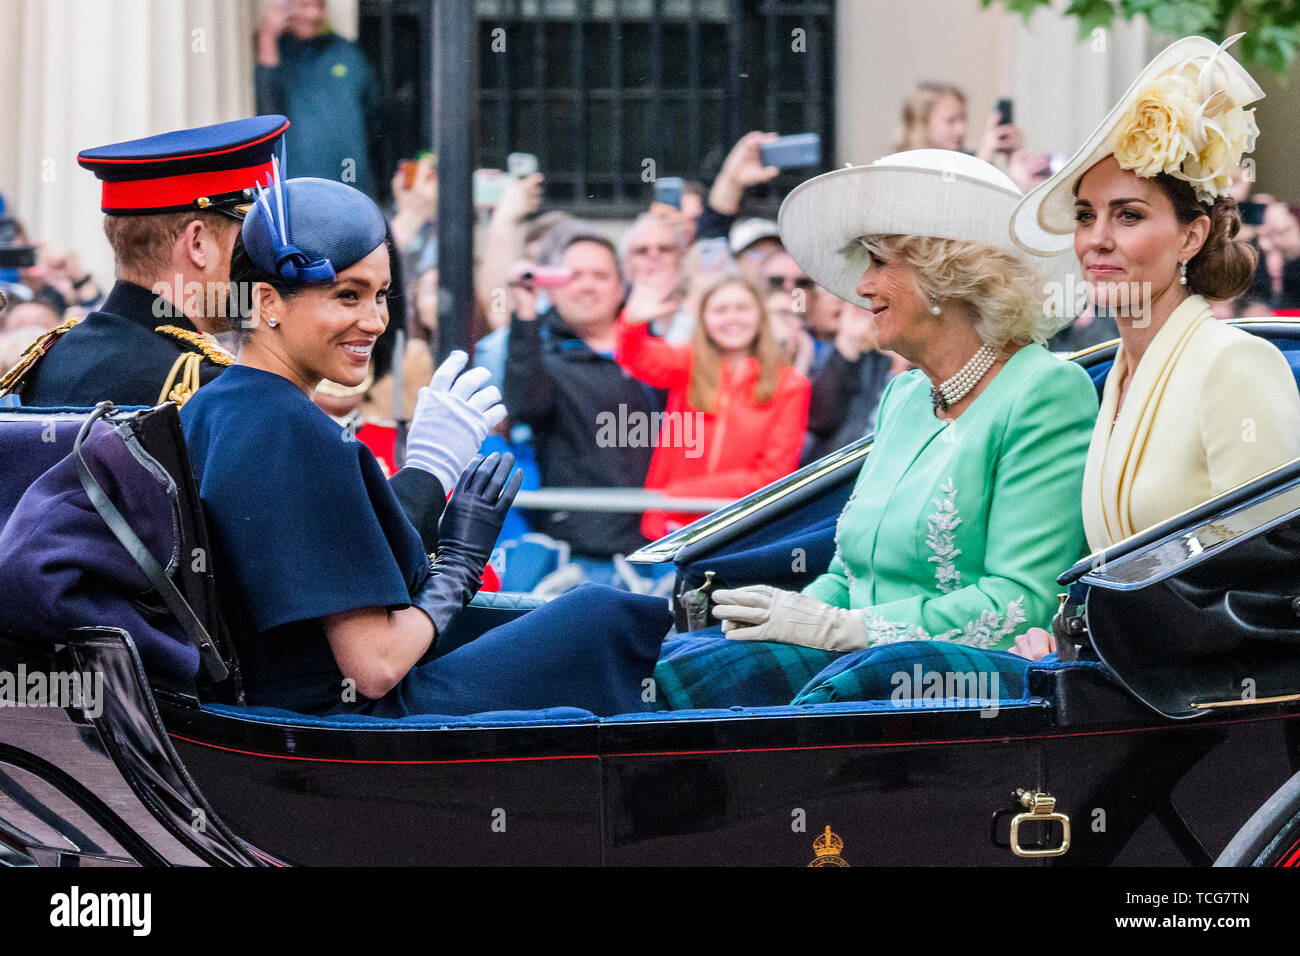 London, UK. 08th June, 2019. The Duke and Duchess of Sussex -  Duchess of Cornwall, The Duchess of Cambridge - The Queen’s Birthday Parade, more popularly known as Trooping the Colour.This year the Regiment “trooping” its Colour (ceremonial Regimental flag) was the 1st Battalion Grenadier Guards. Credit: Guy Bell/Alamy Live News Stock Photo